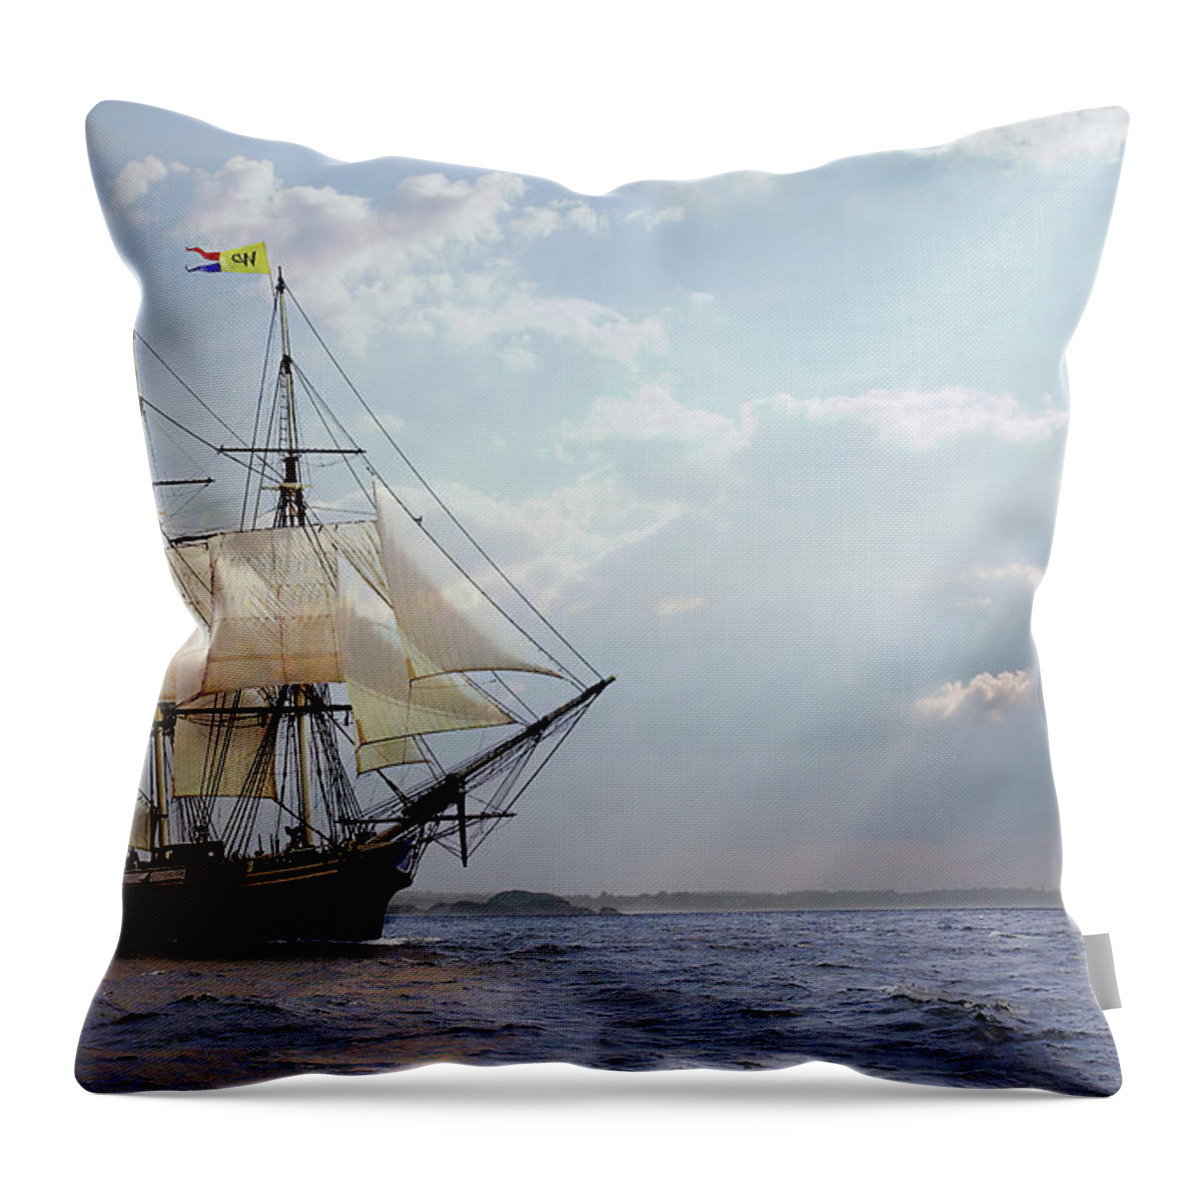 Friendship Of Salem Throw Pillow featuring the photograph Salem's Friendship Sails Home by Jeff Folger